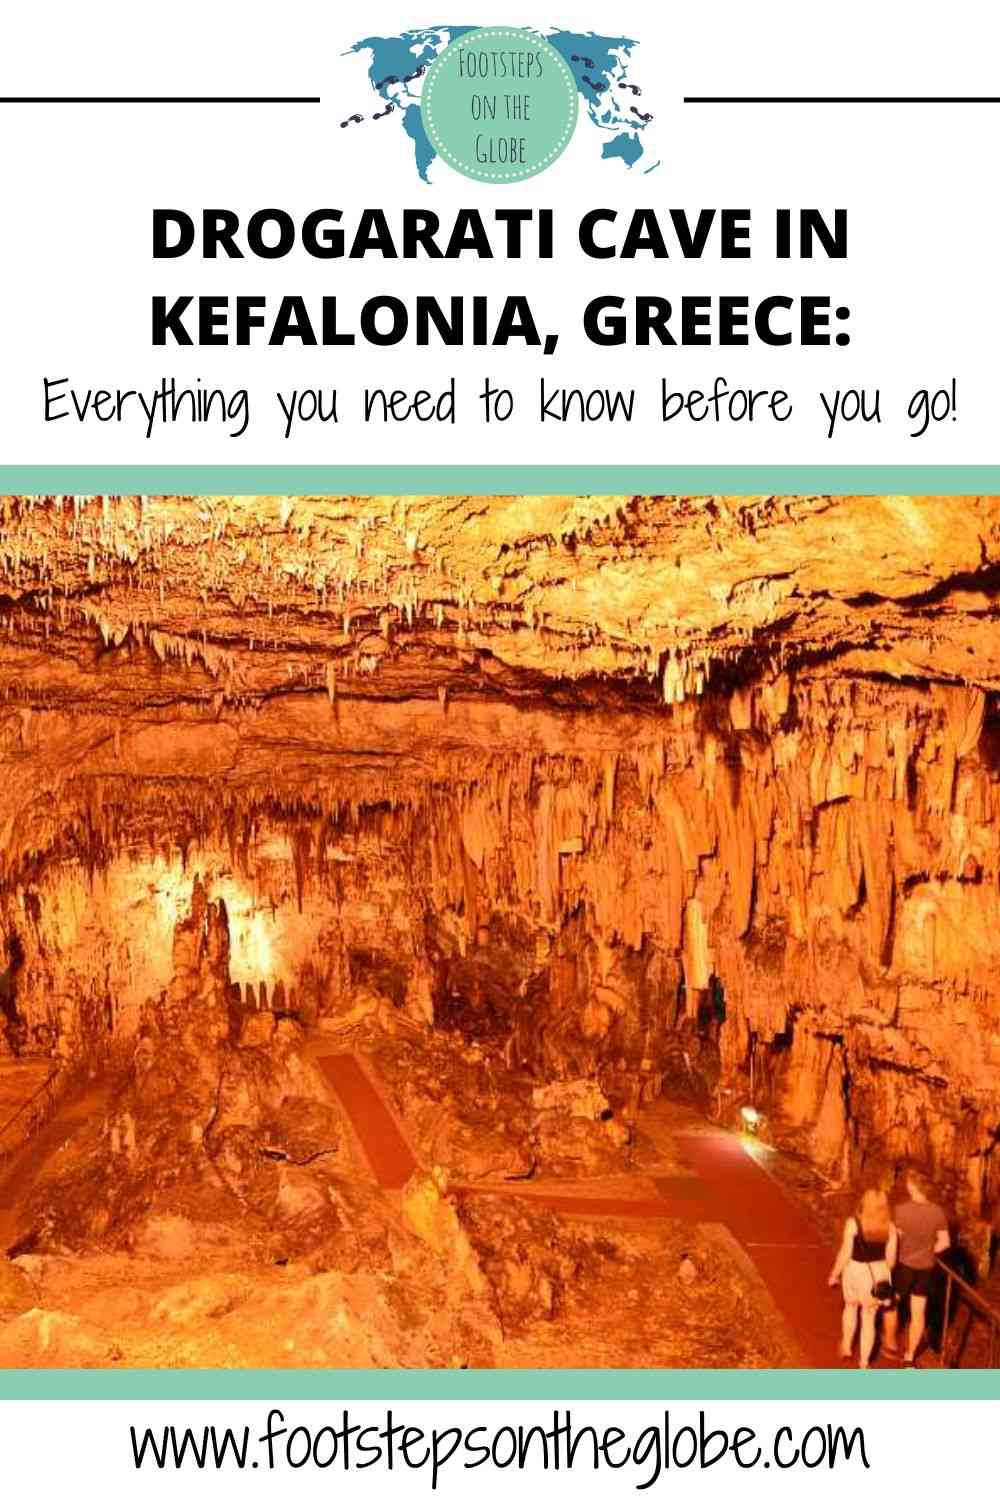 Pinterst image of the inside of Drogarati Cave with the text: "Drogarati Cave in Kefalonia, Greece: Everything you need to now before you go!" 